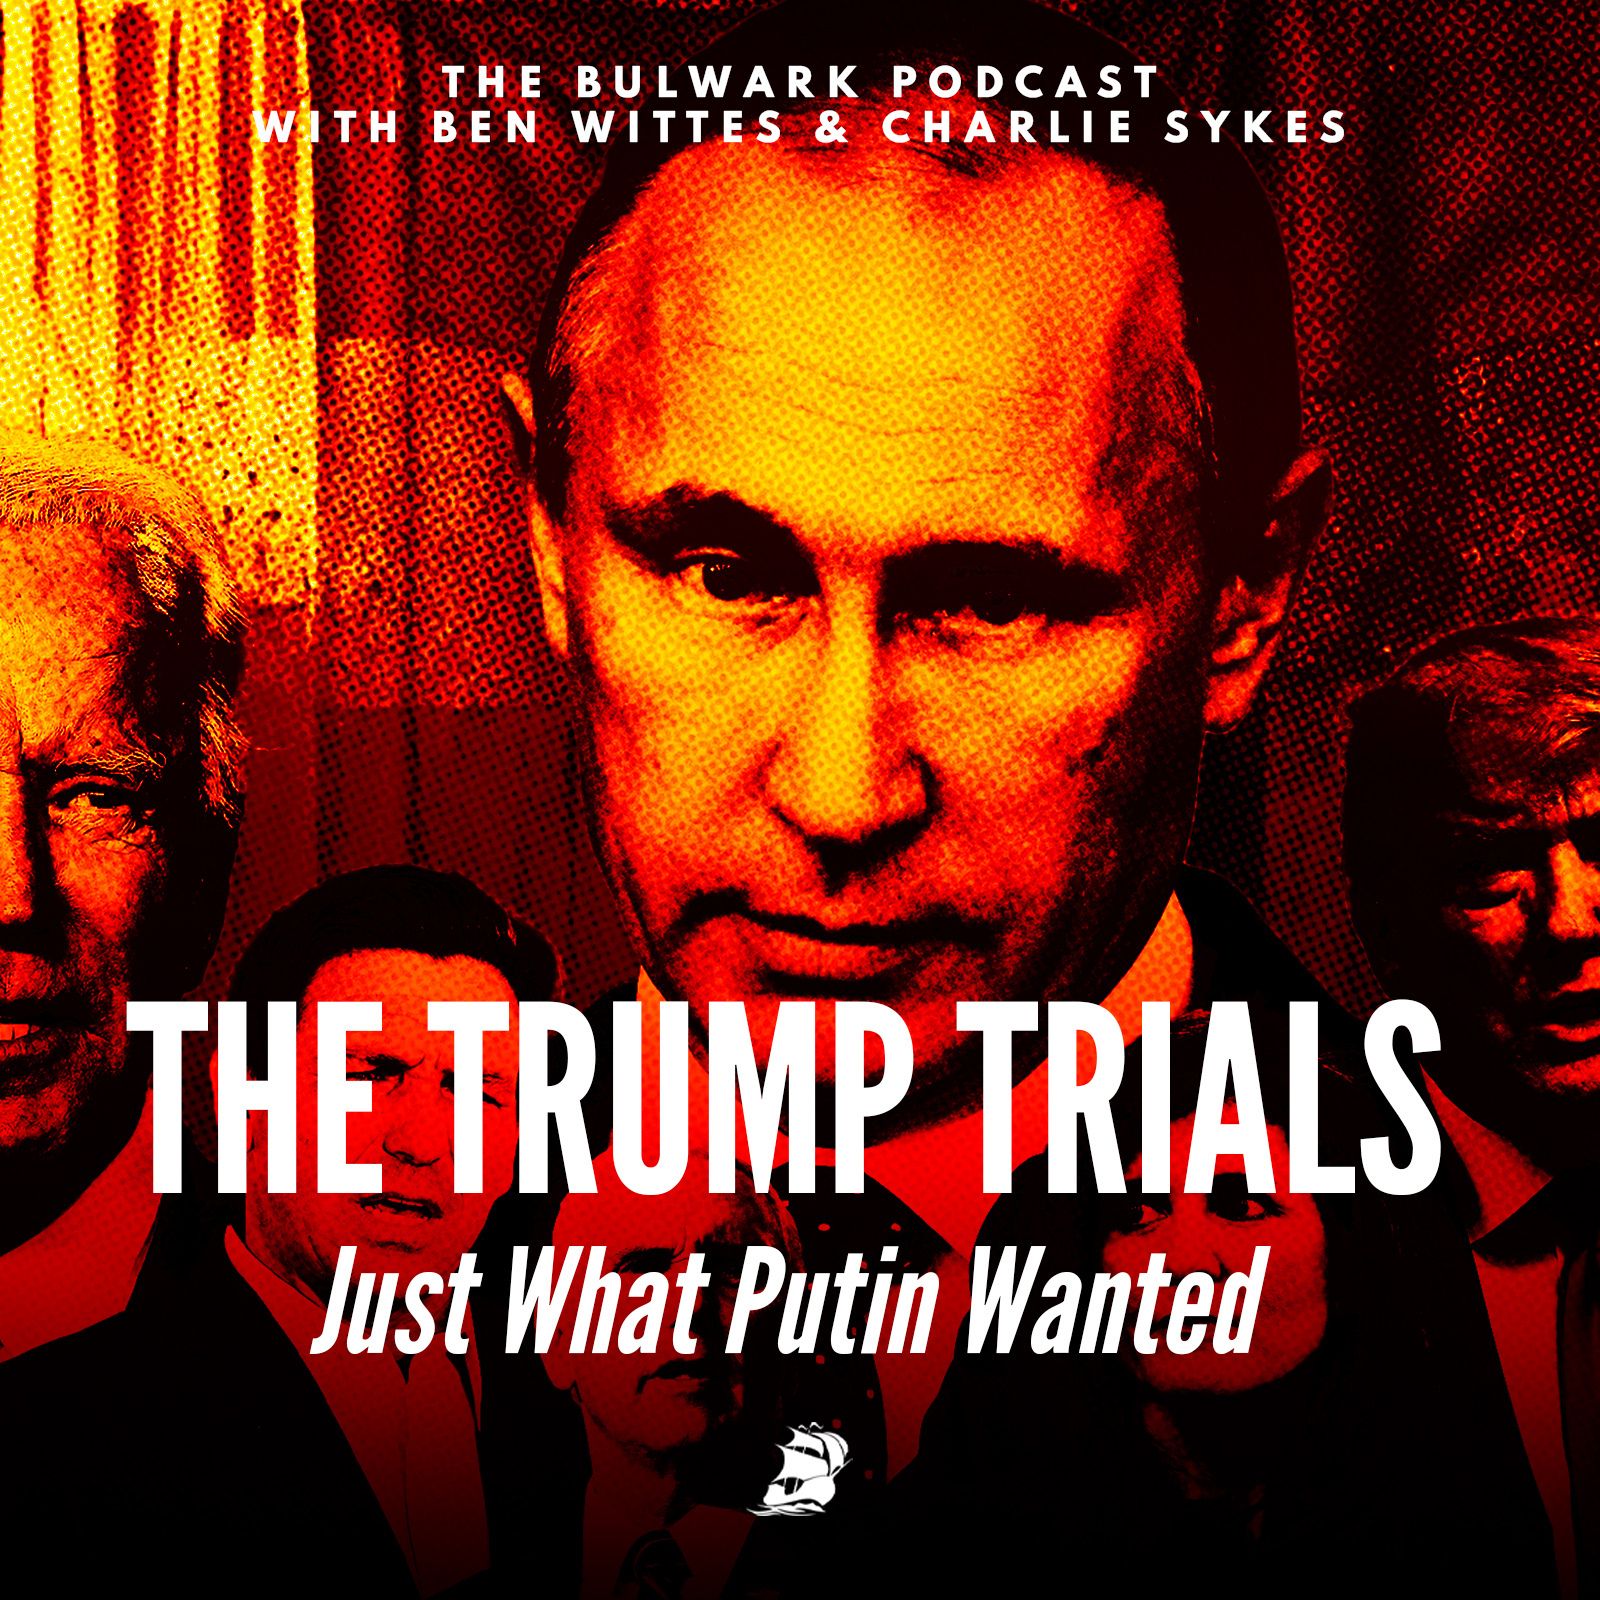 Just What Putin Wanted by The Bulwark Podcast